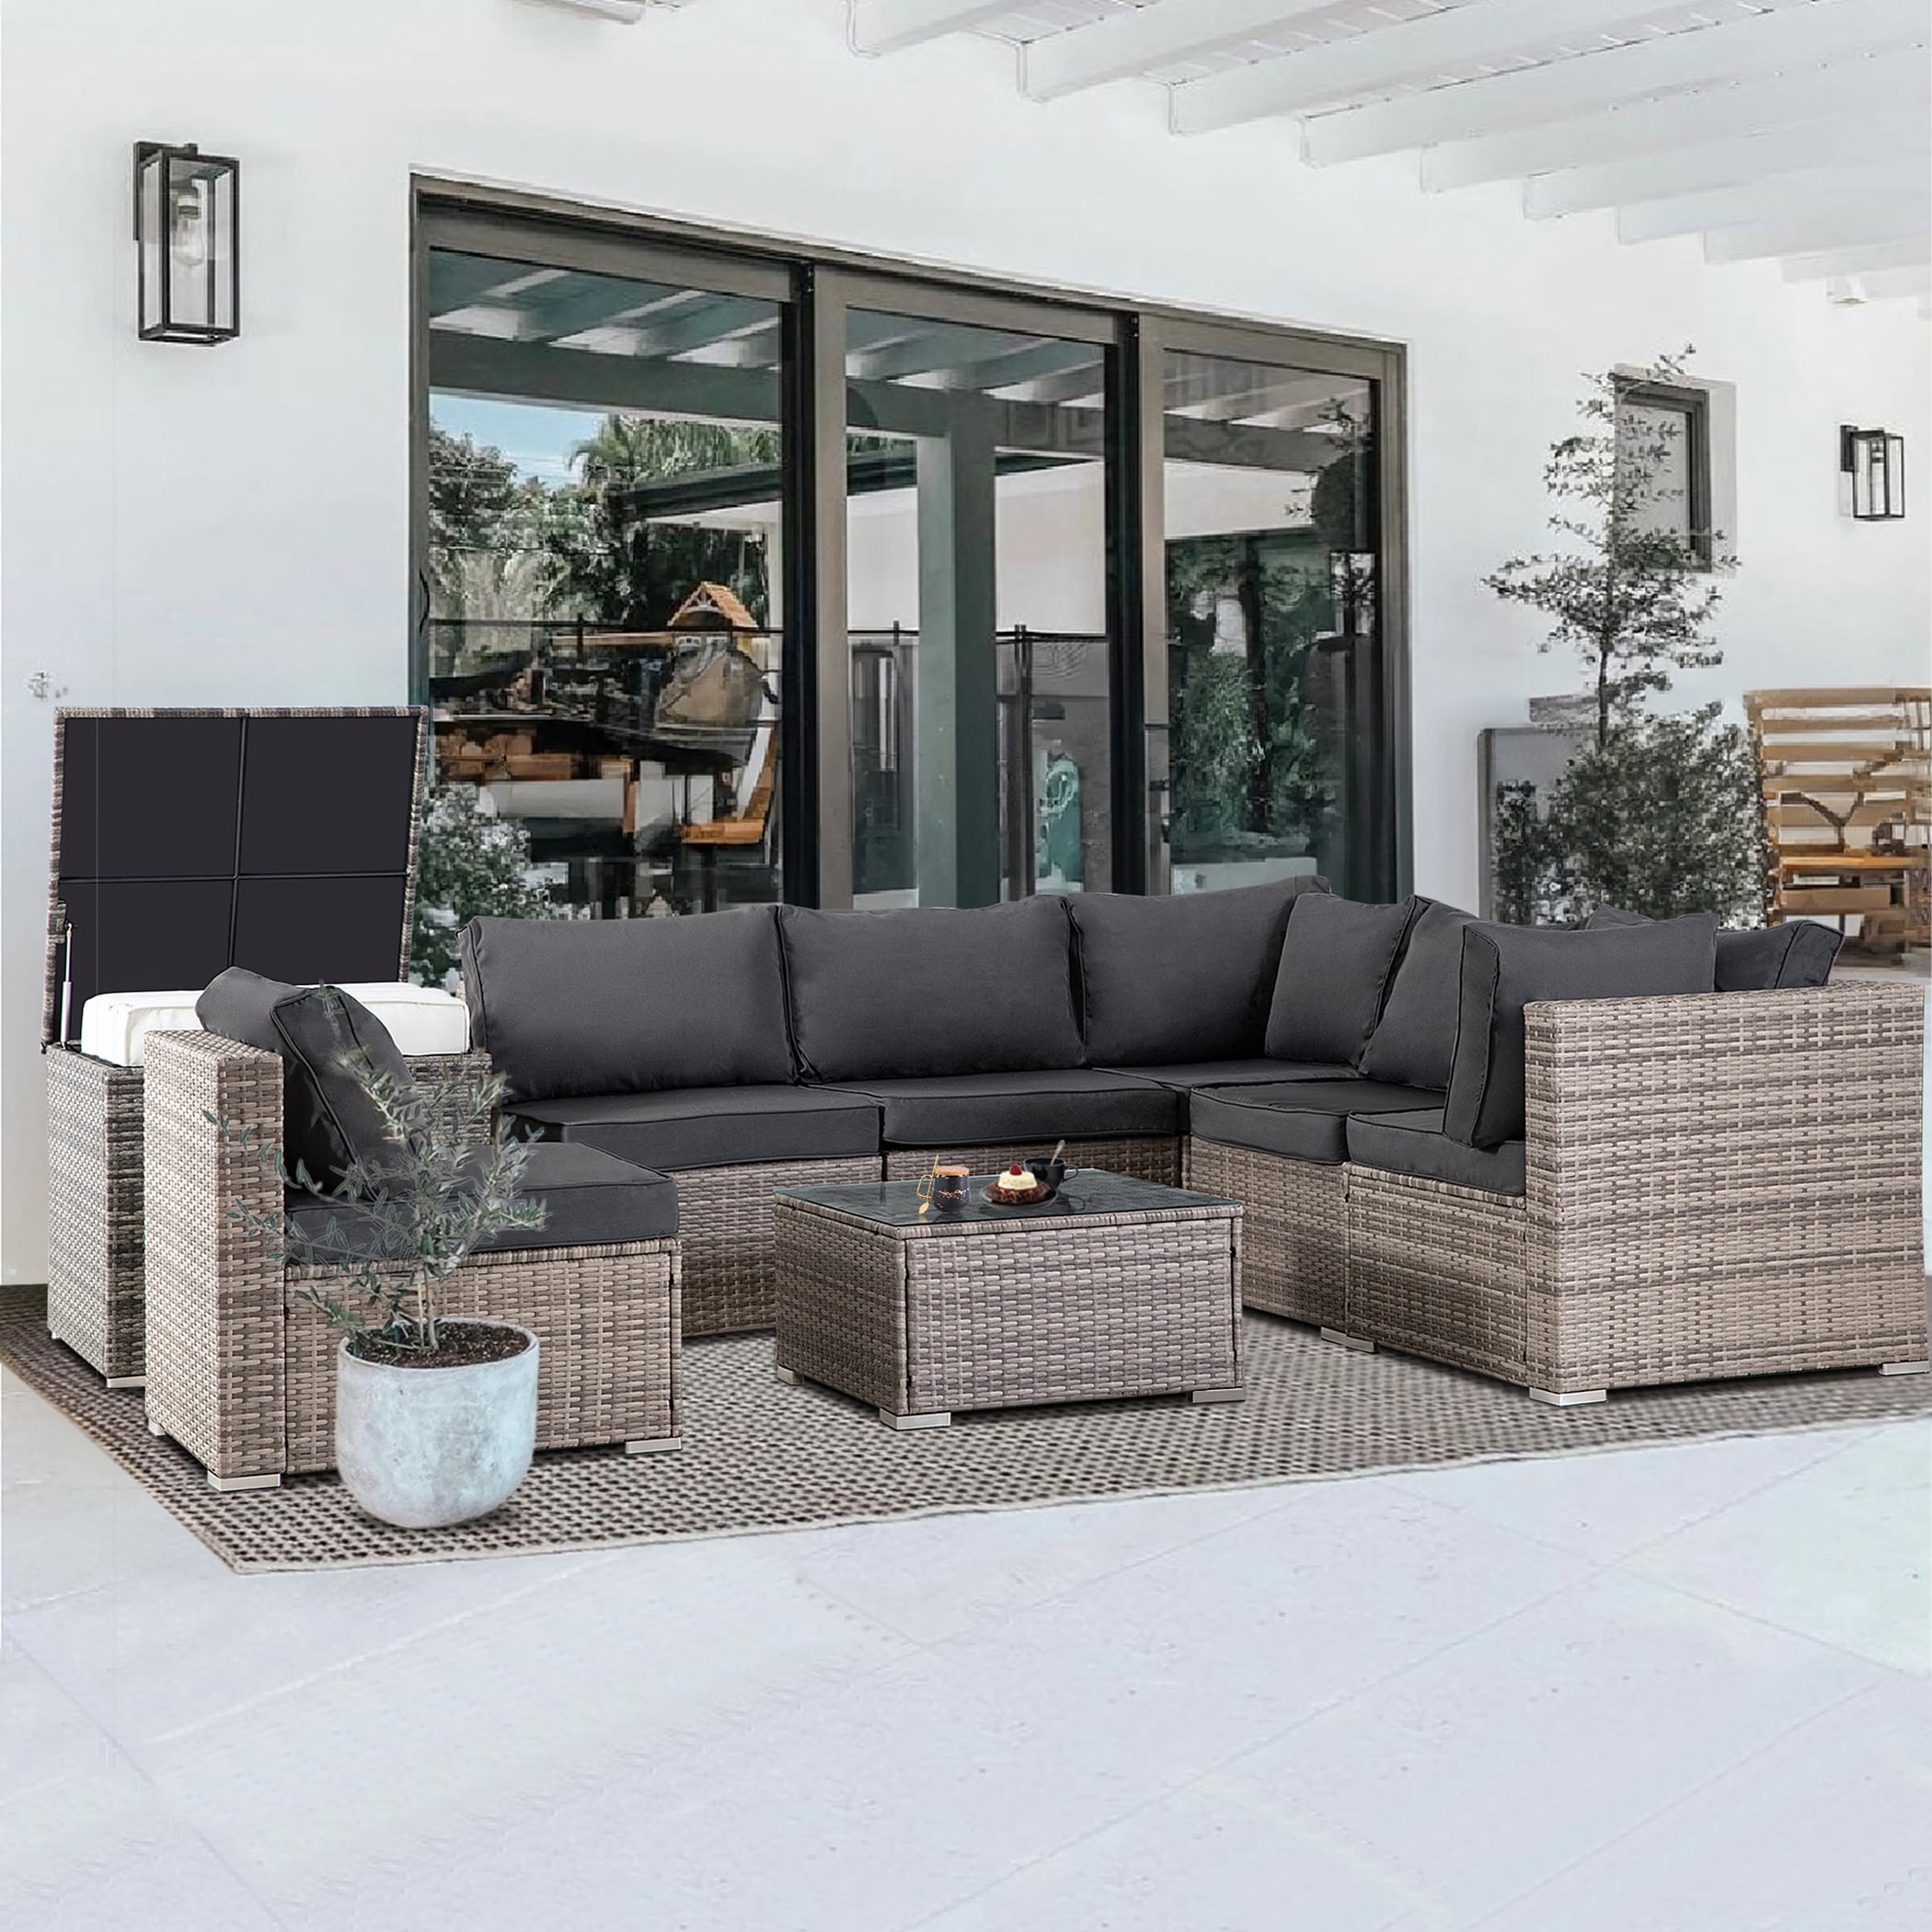 FOREST HOME 7-Piece Cushions Gray Rattan Conversation at Patio Set with